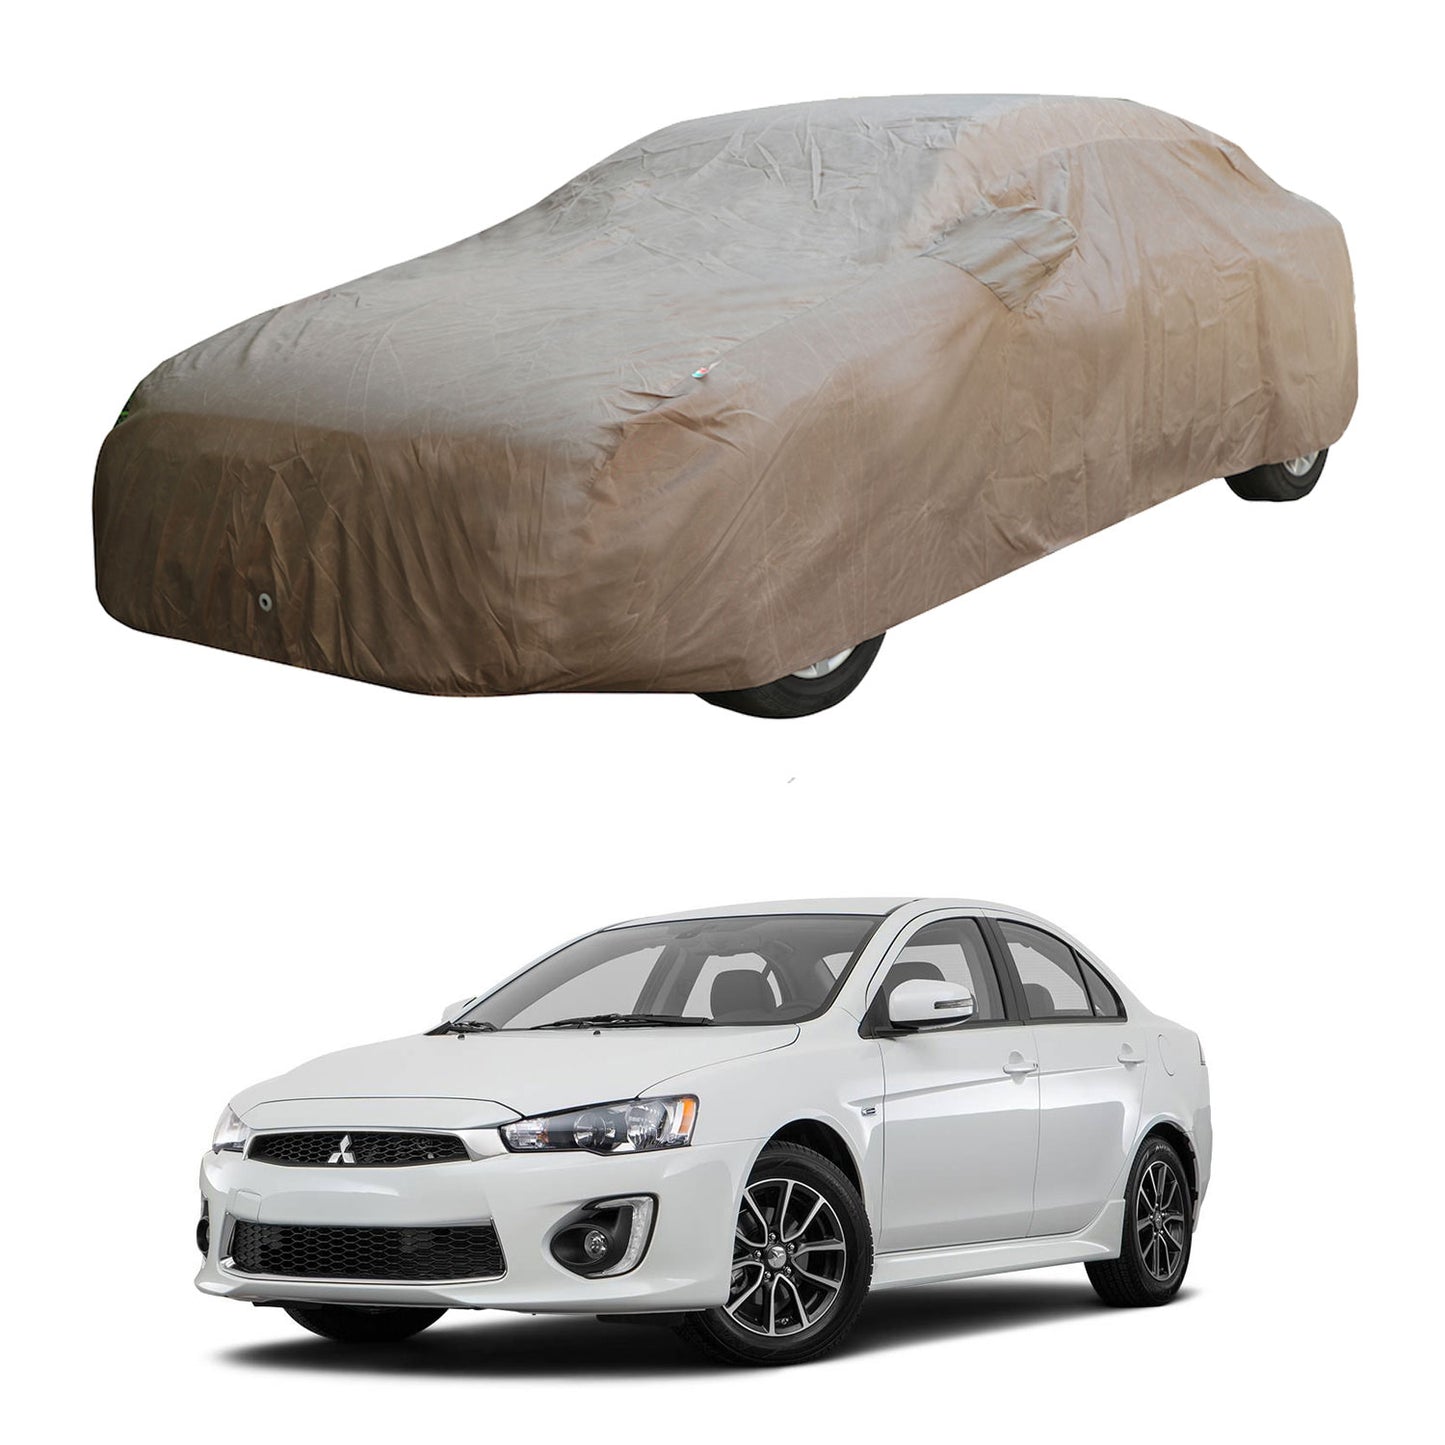 Oshotto Brown 100% Waterproof Car Body Cover with Mirror Pockets For Mitsubishi Lancer/Cedia